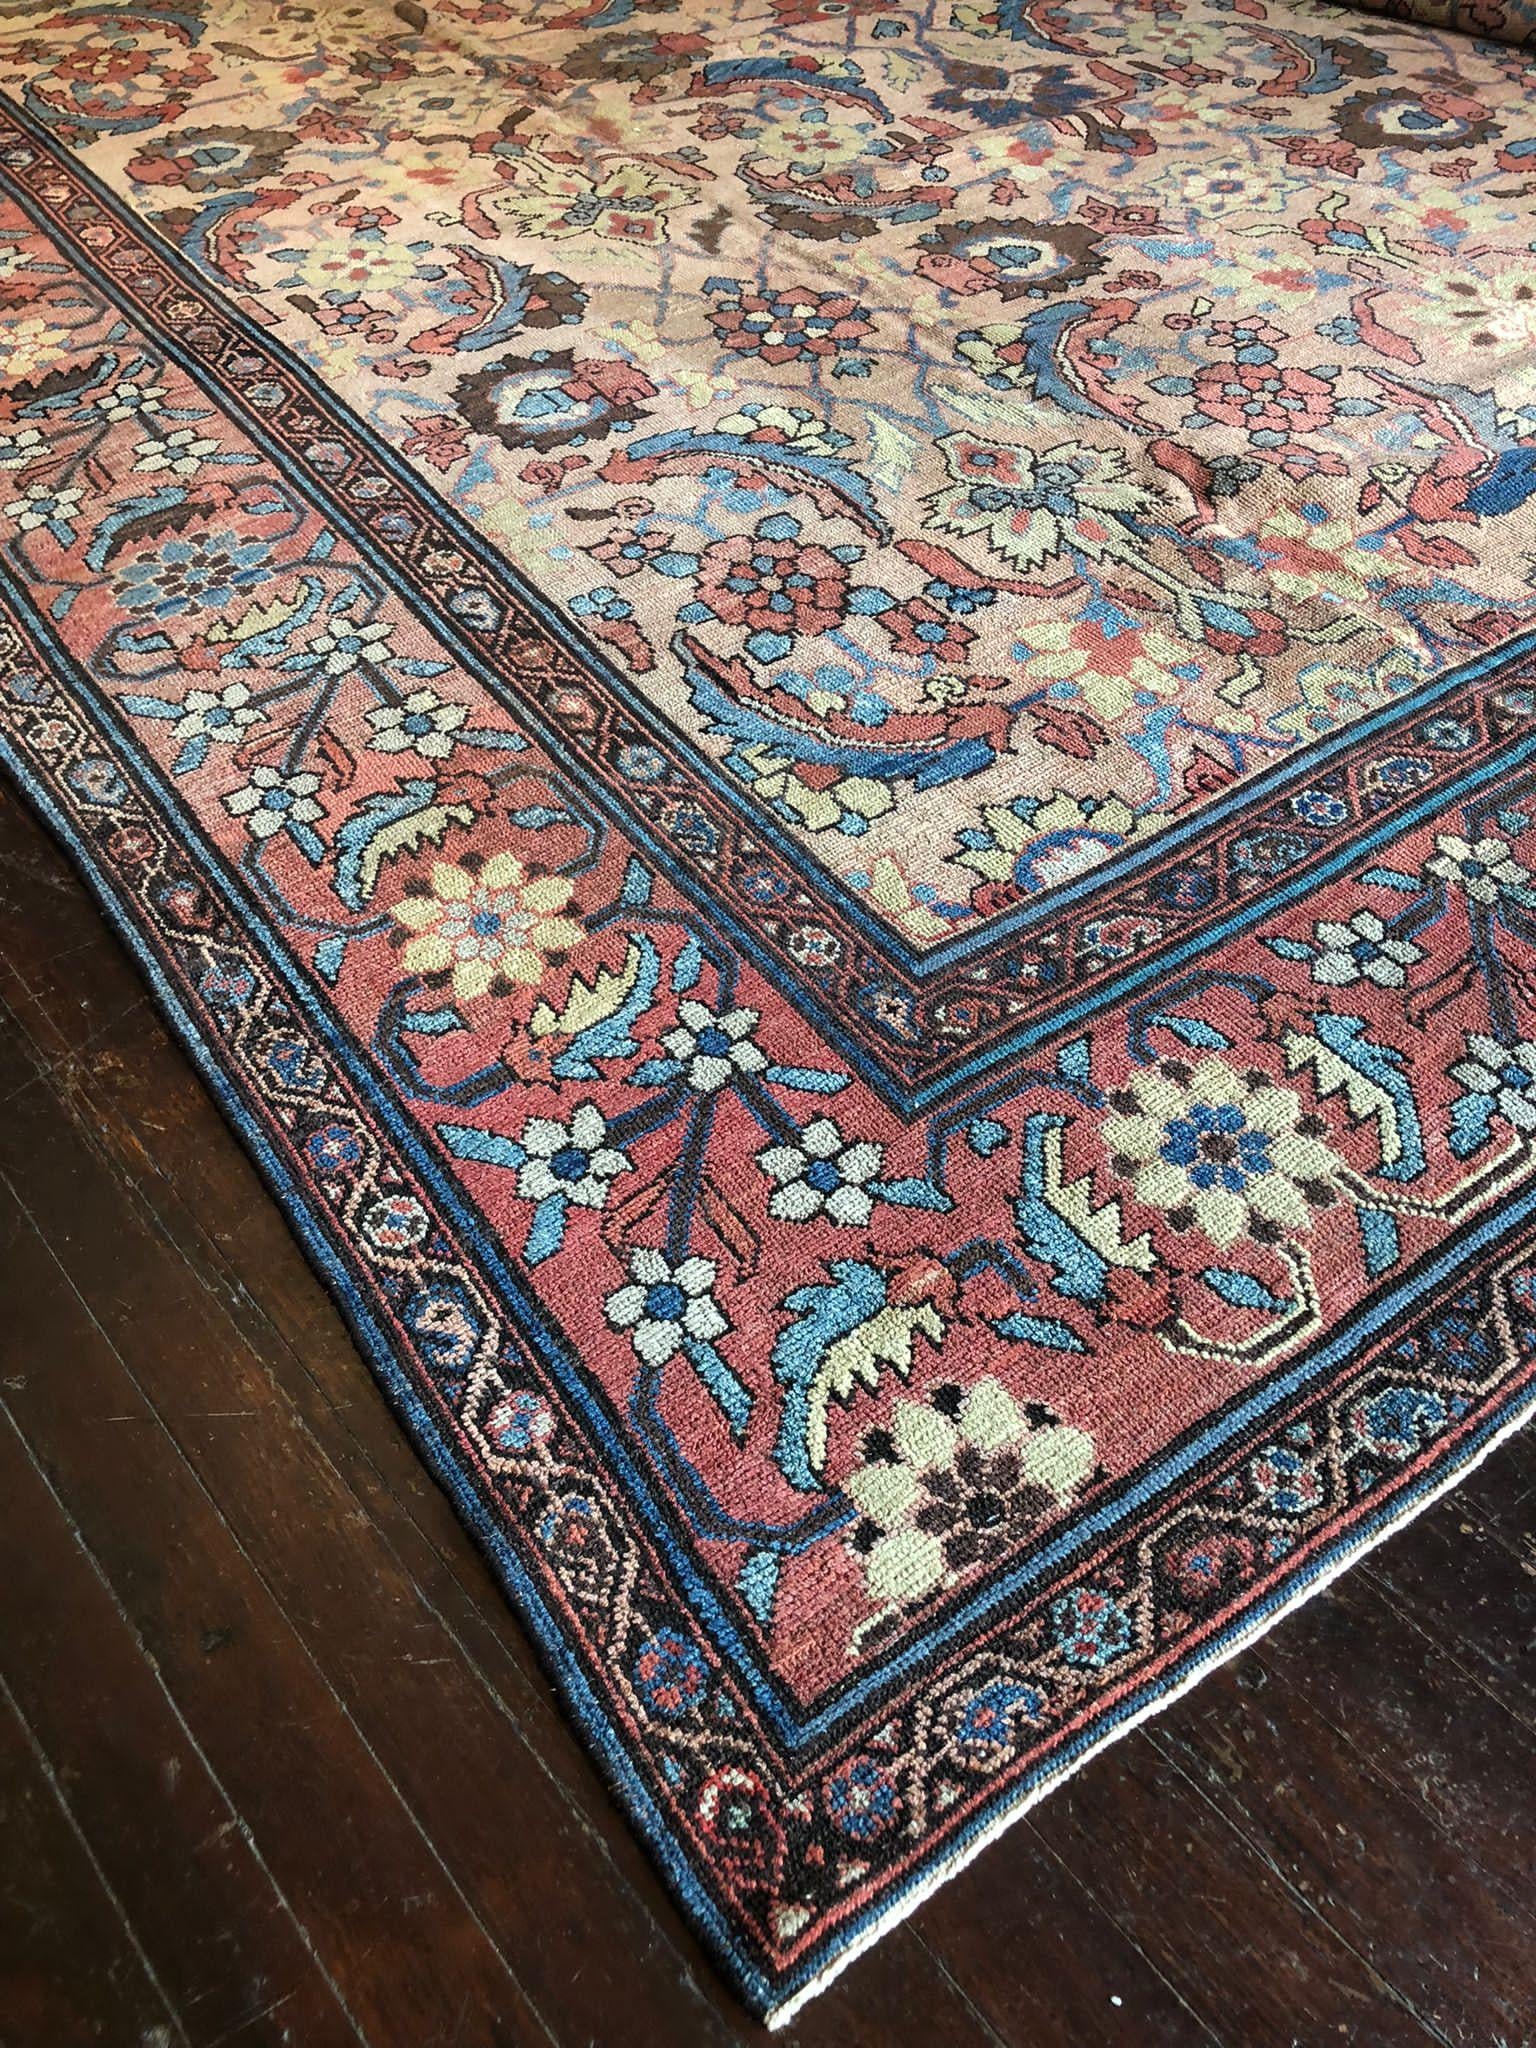 An Antique Malayer Rug is a true treasure of Persian craftsmanship, celebrated for its timeless beauty and intricate designs. This particular rug, with its generous dimensions of 12 feet 2 inches by 16 feet, is a magnificent example of the artistry